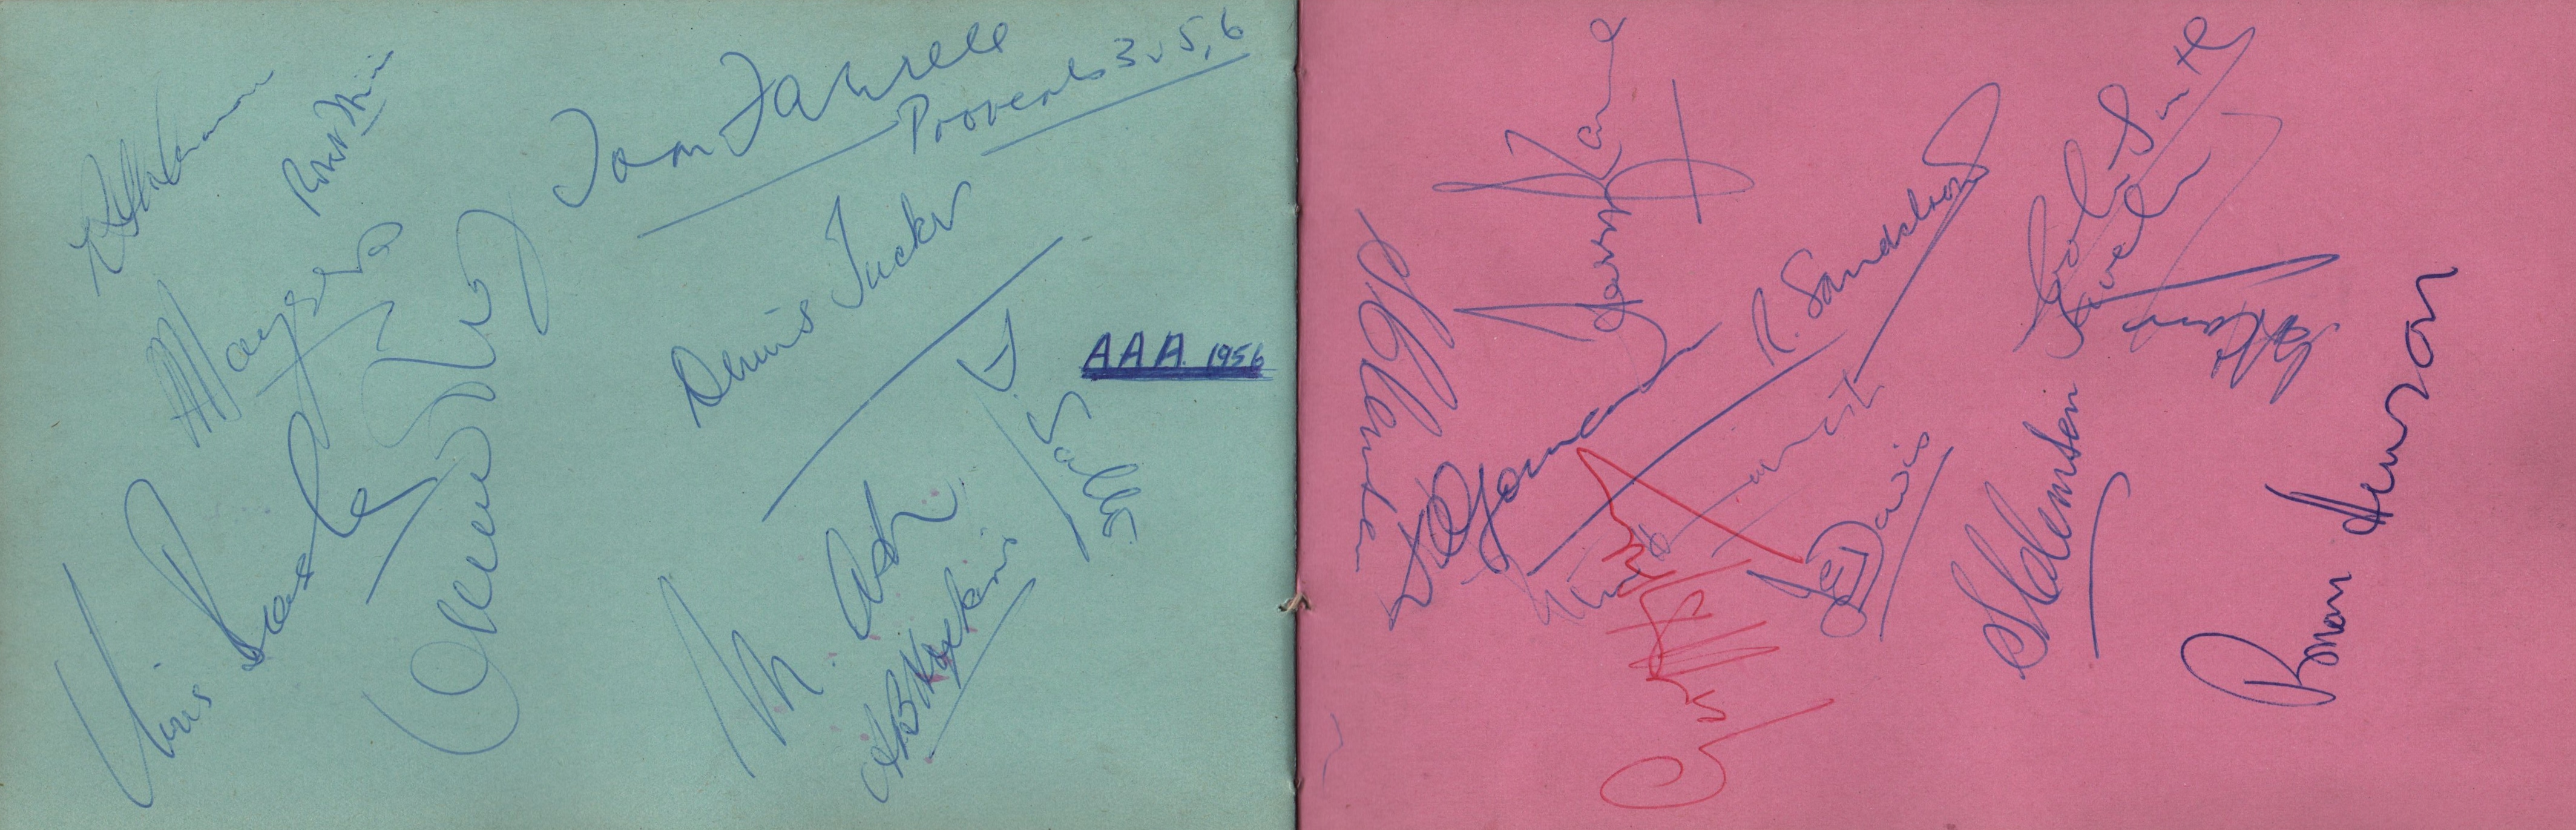 AUTOGRAPH ALBUM: An autograph album containing over 90 signatures by various cricket teams and - Image 14 of 16